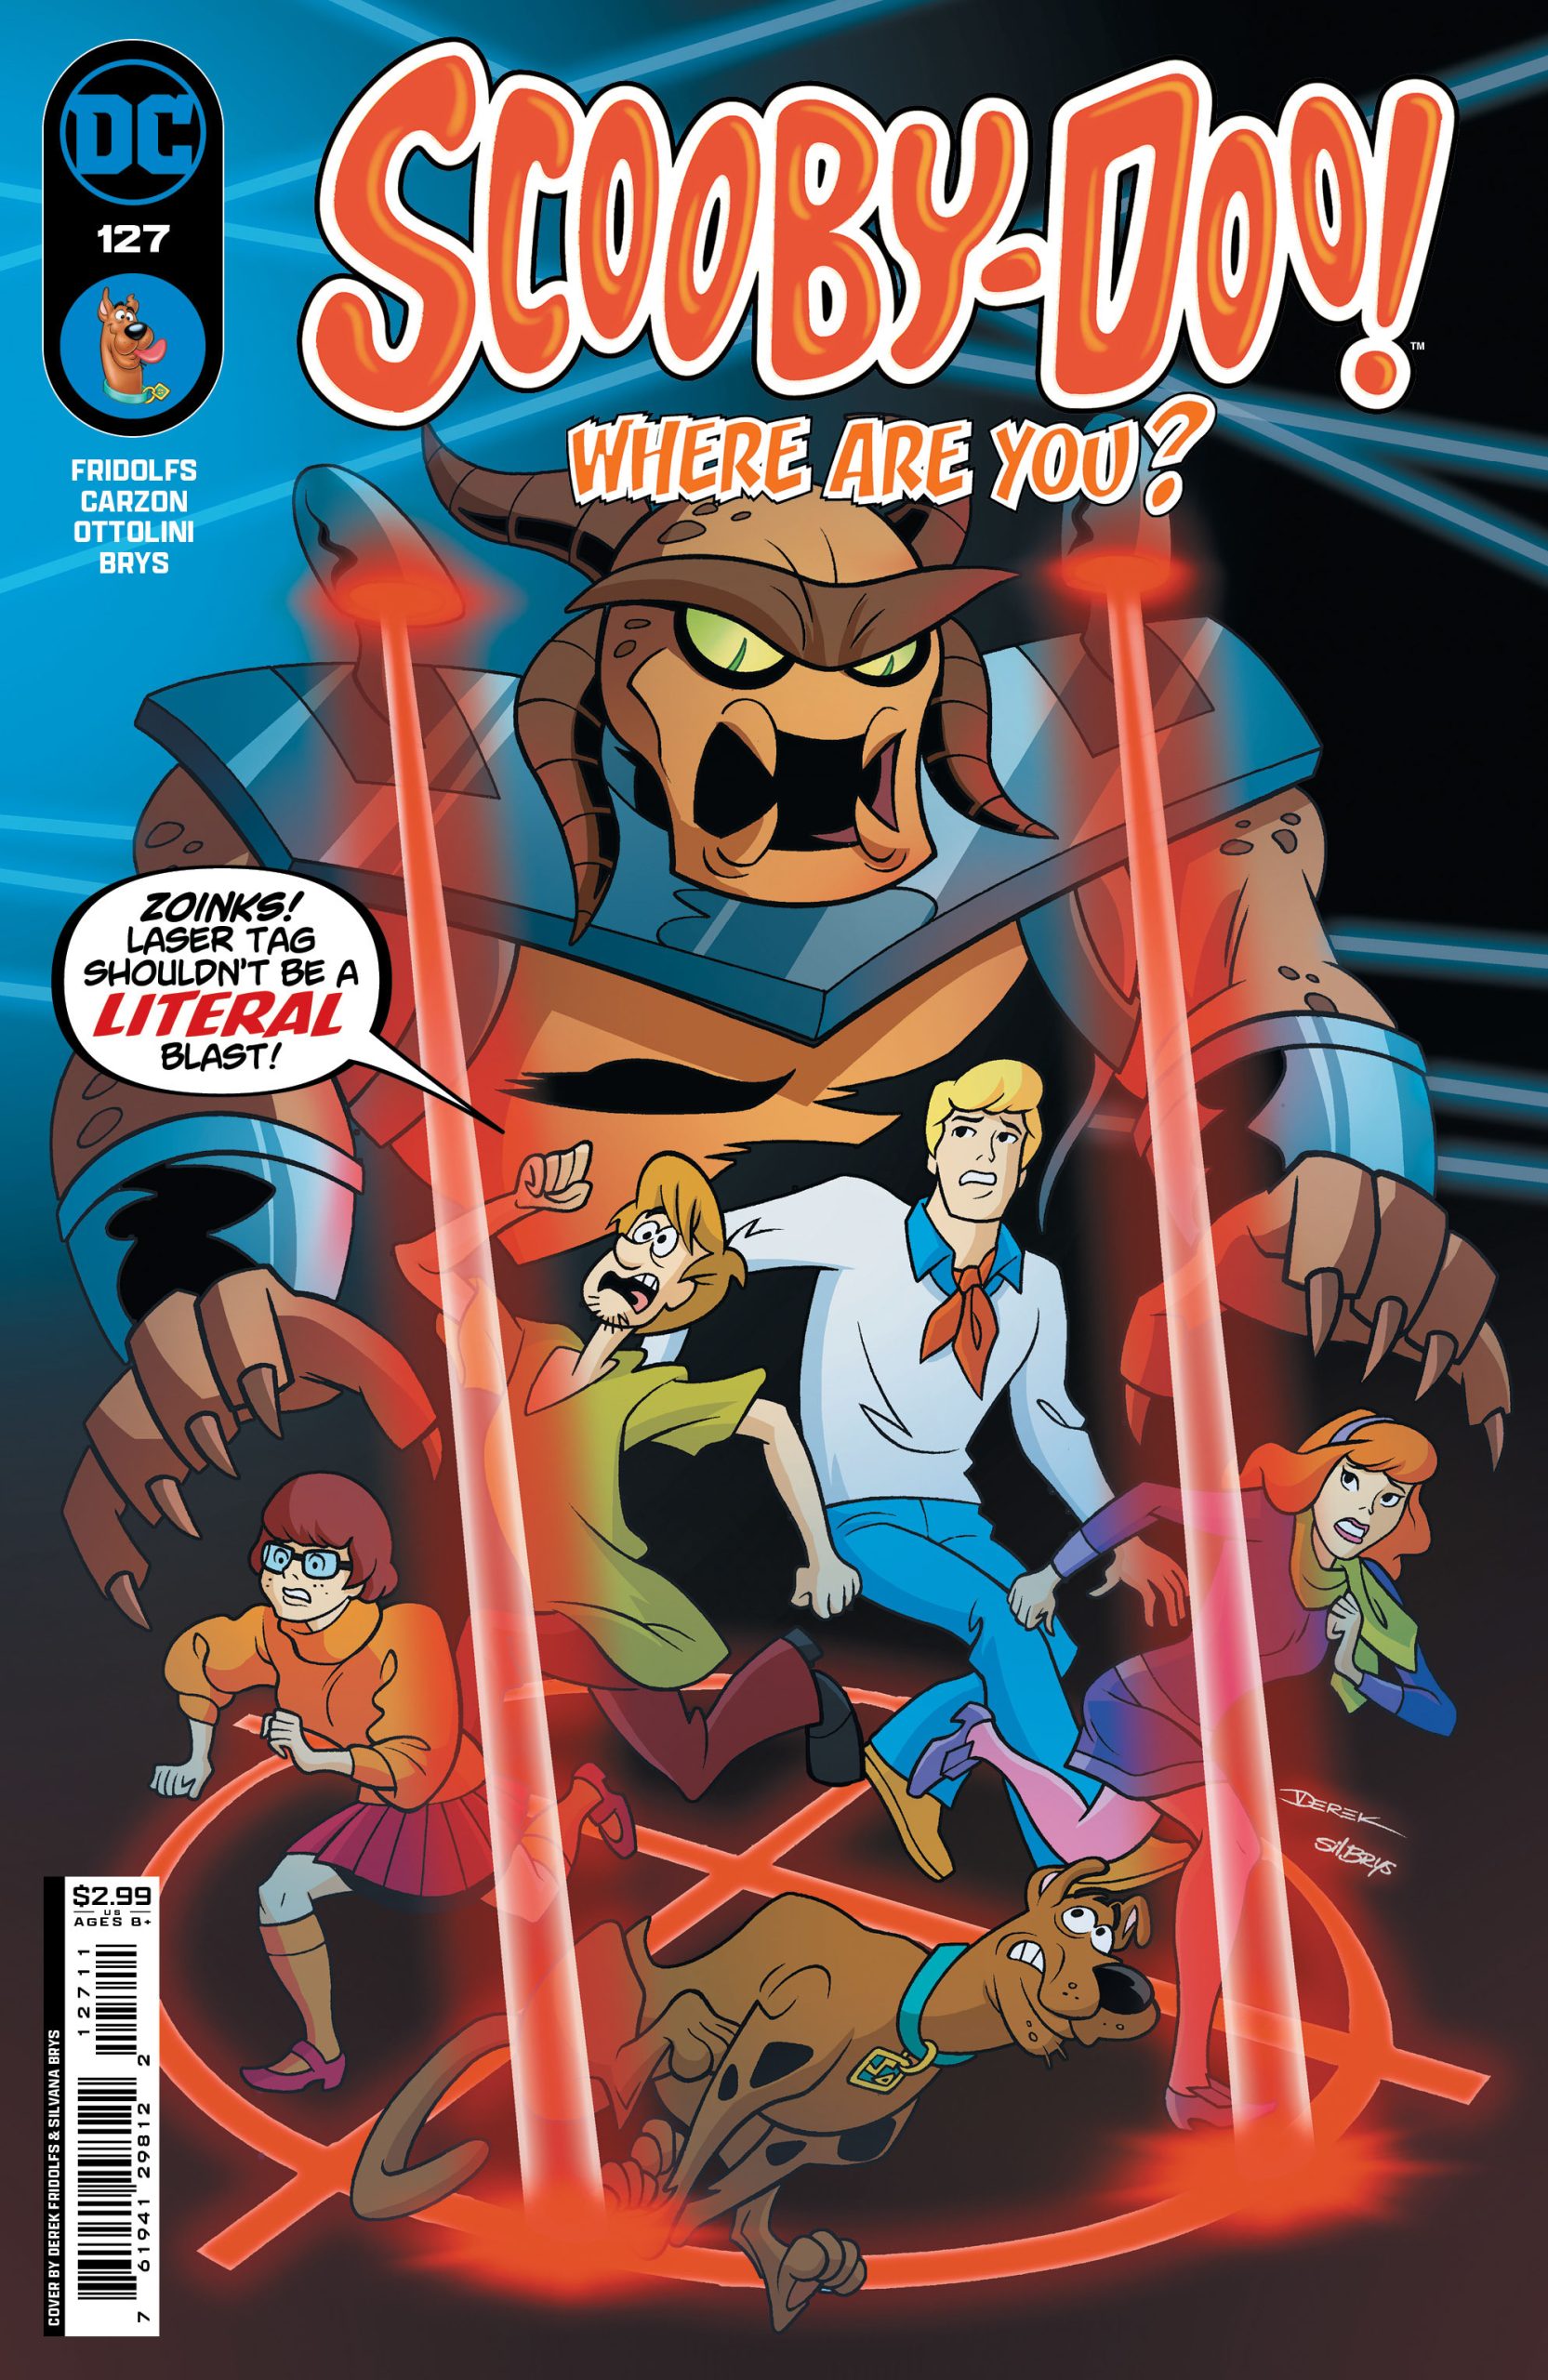 DC Preview: Scooby-Doo Where Are You #127